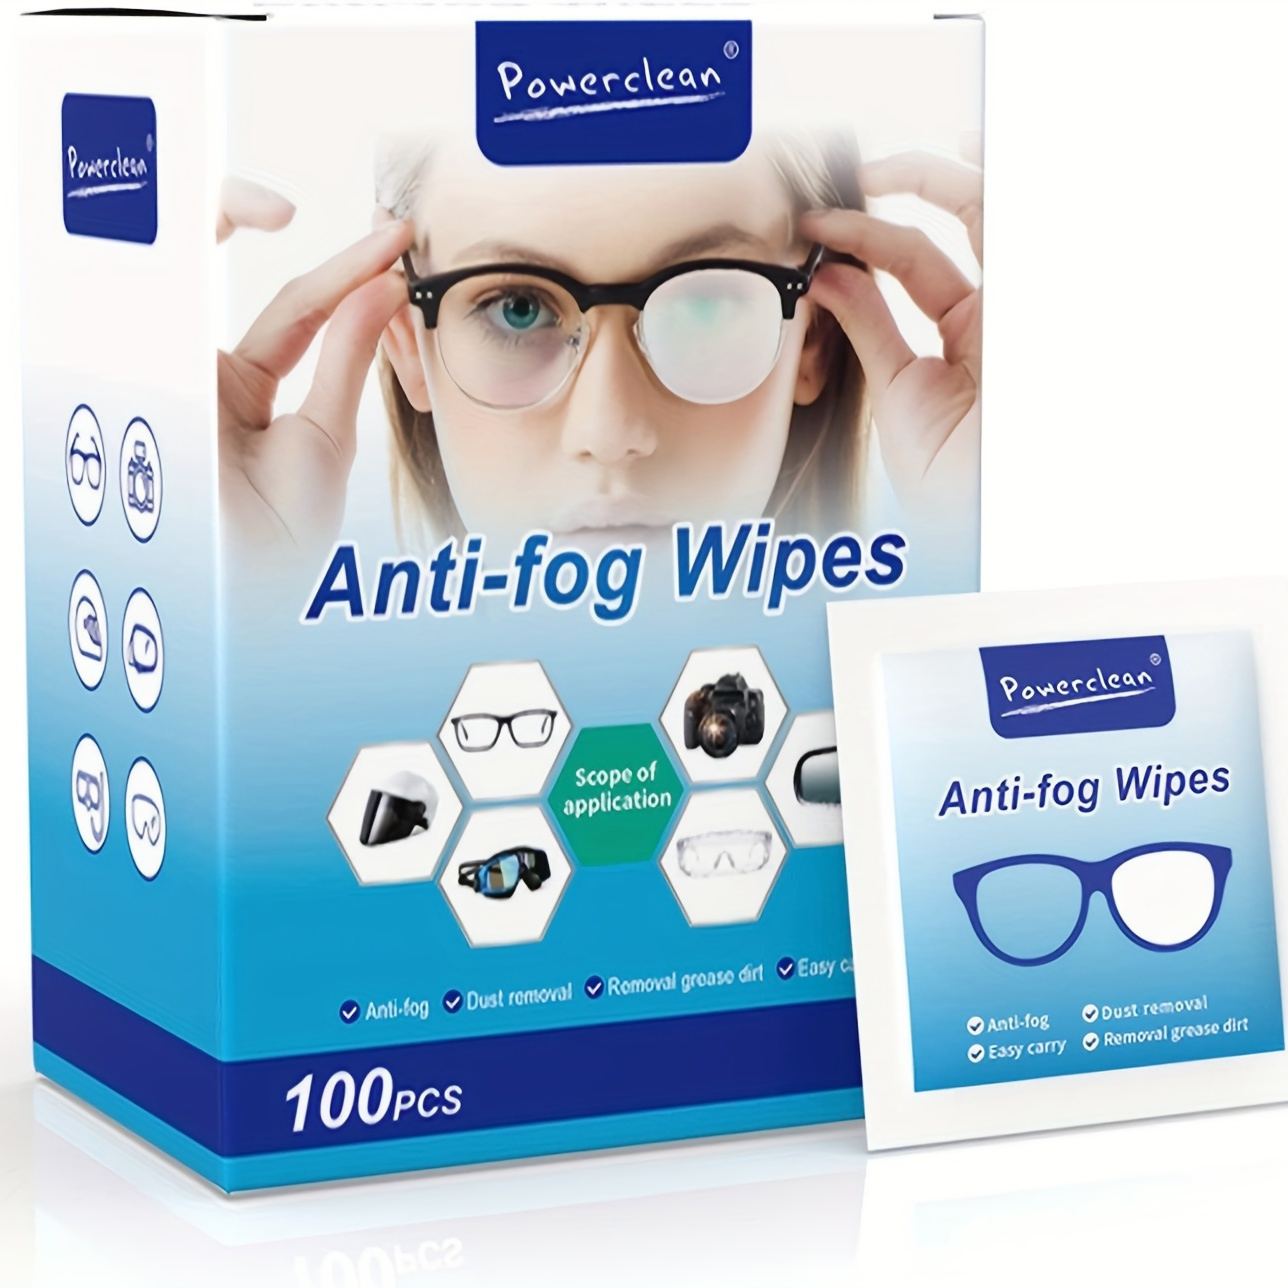 

100pcs Eyeglass Cleaner Lens Wipes, Pre-moistened Individually Wrapped Wipes, Non-scratching, Non-streaking, Anti-fog, Safe For Eyeglasses, Goggles, Camera Lenses, And Cleaning Supplies